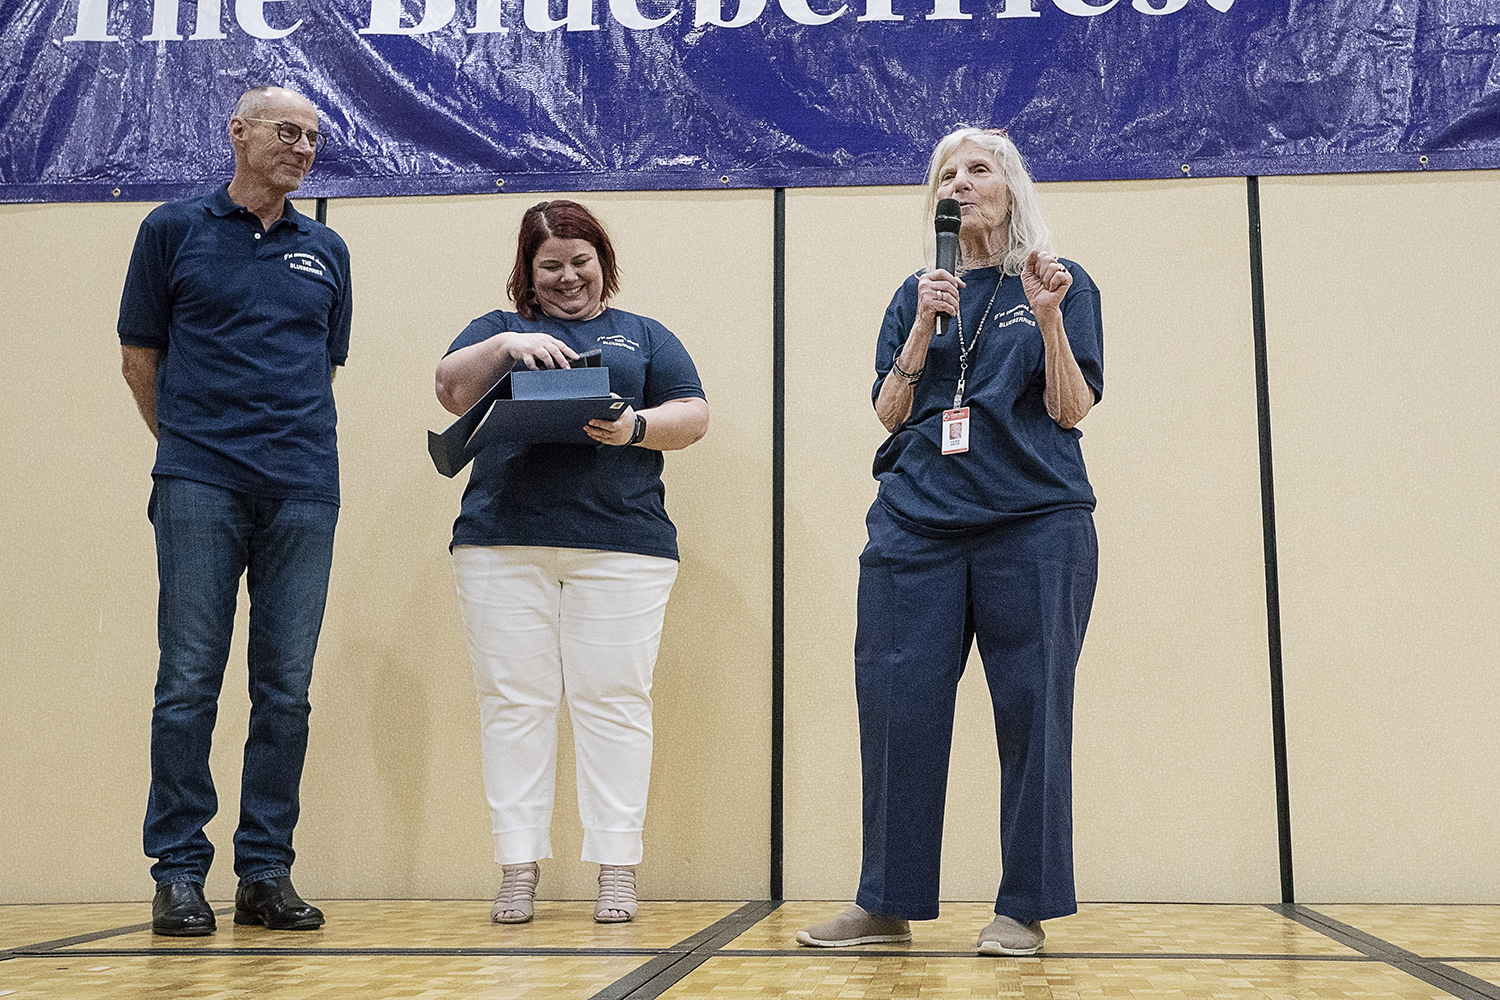 Flint, MI - Friday, May 4, 2018: Grand Blanc Perry Innovation Center teacher Vickie Weiss (right) speaks to the Blueberry Ambassadors after receiving the Blueberry Ambassador Inspirational Teacher Award during the 5th Annual Blueberry Ambassador Awar